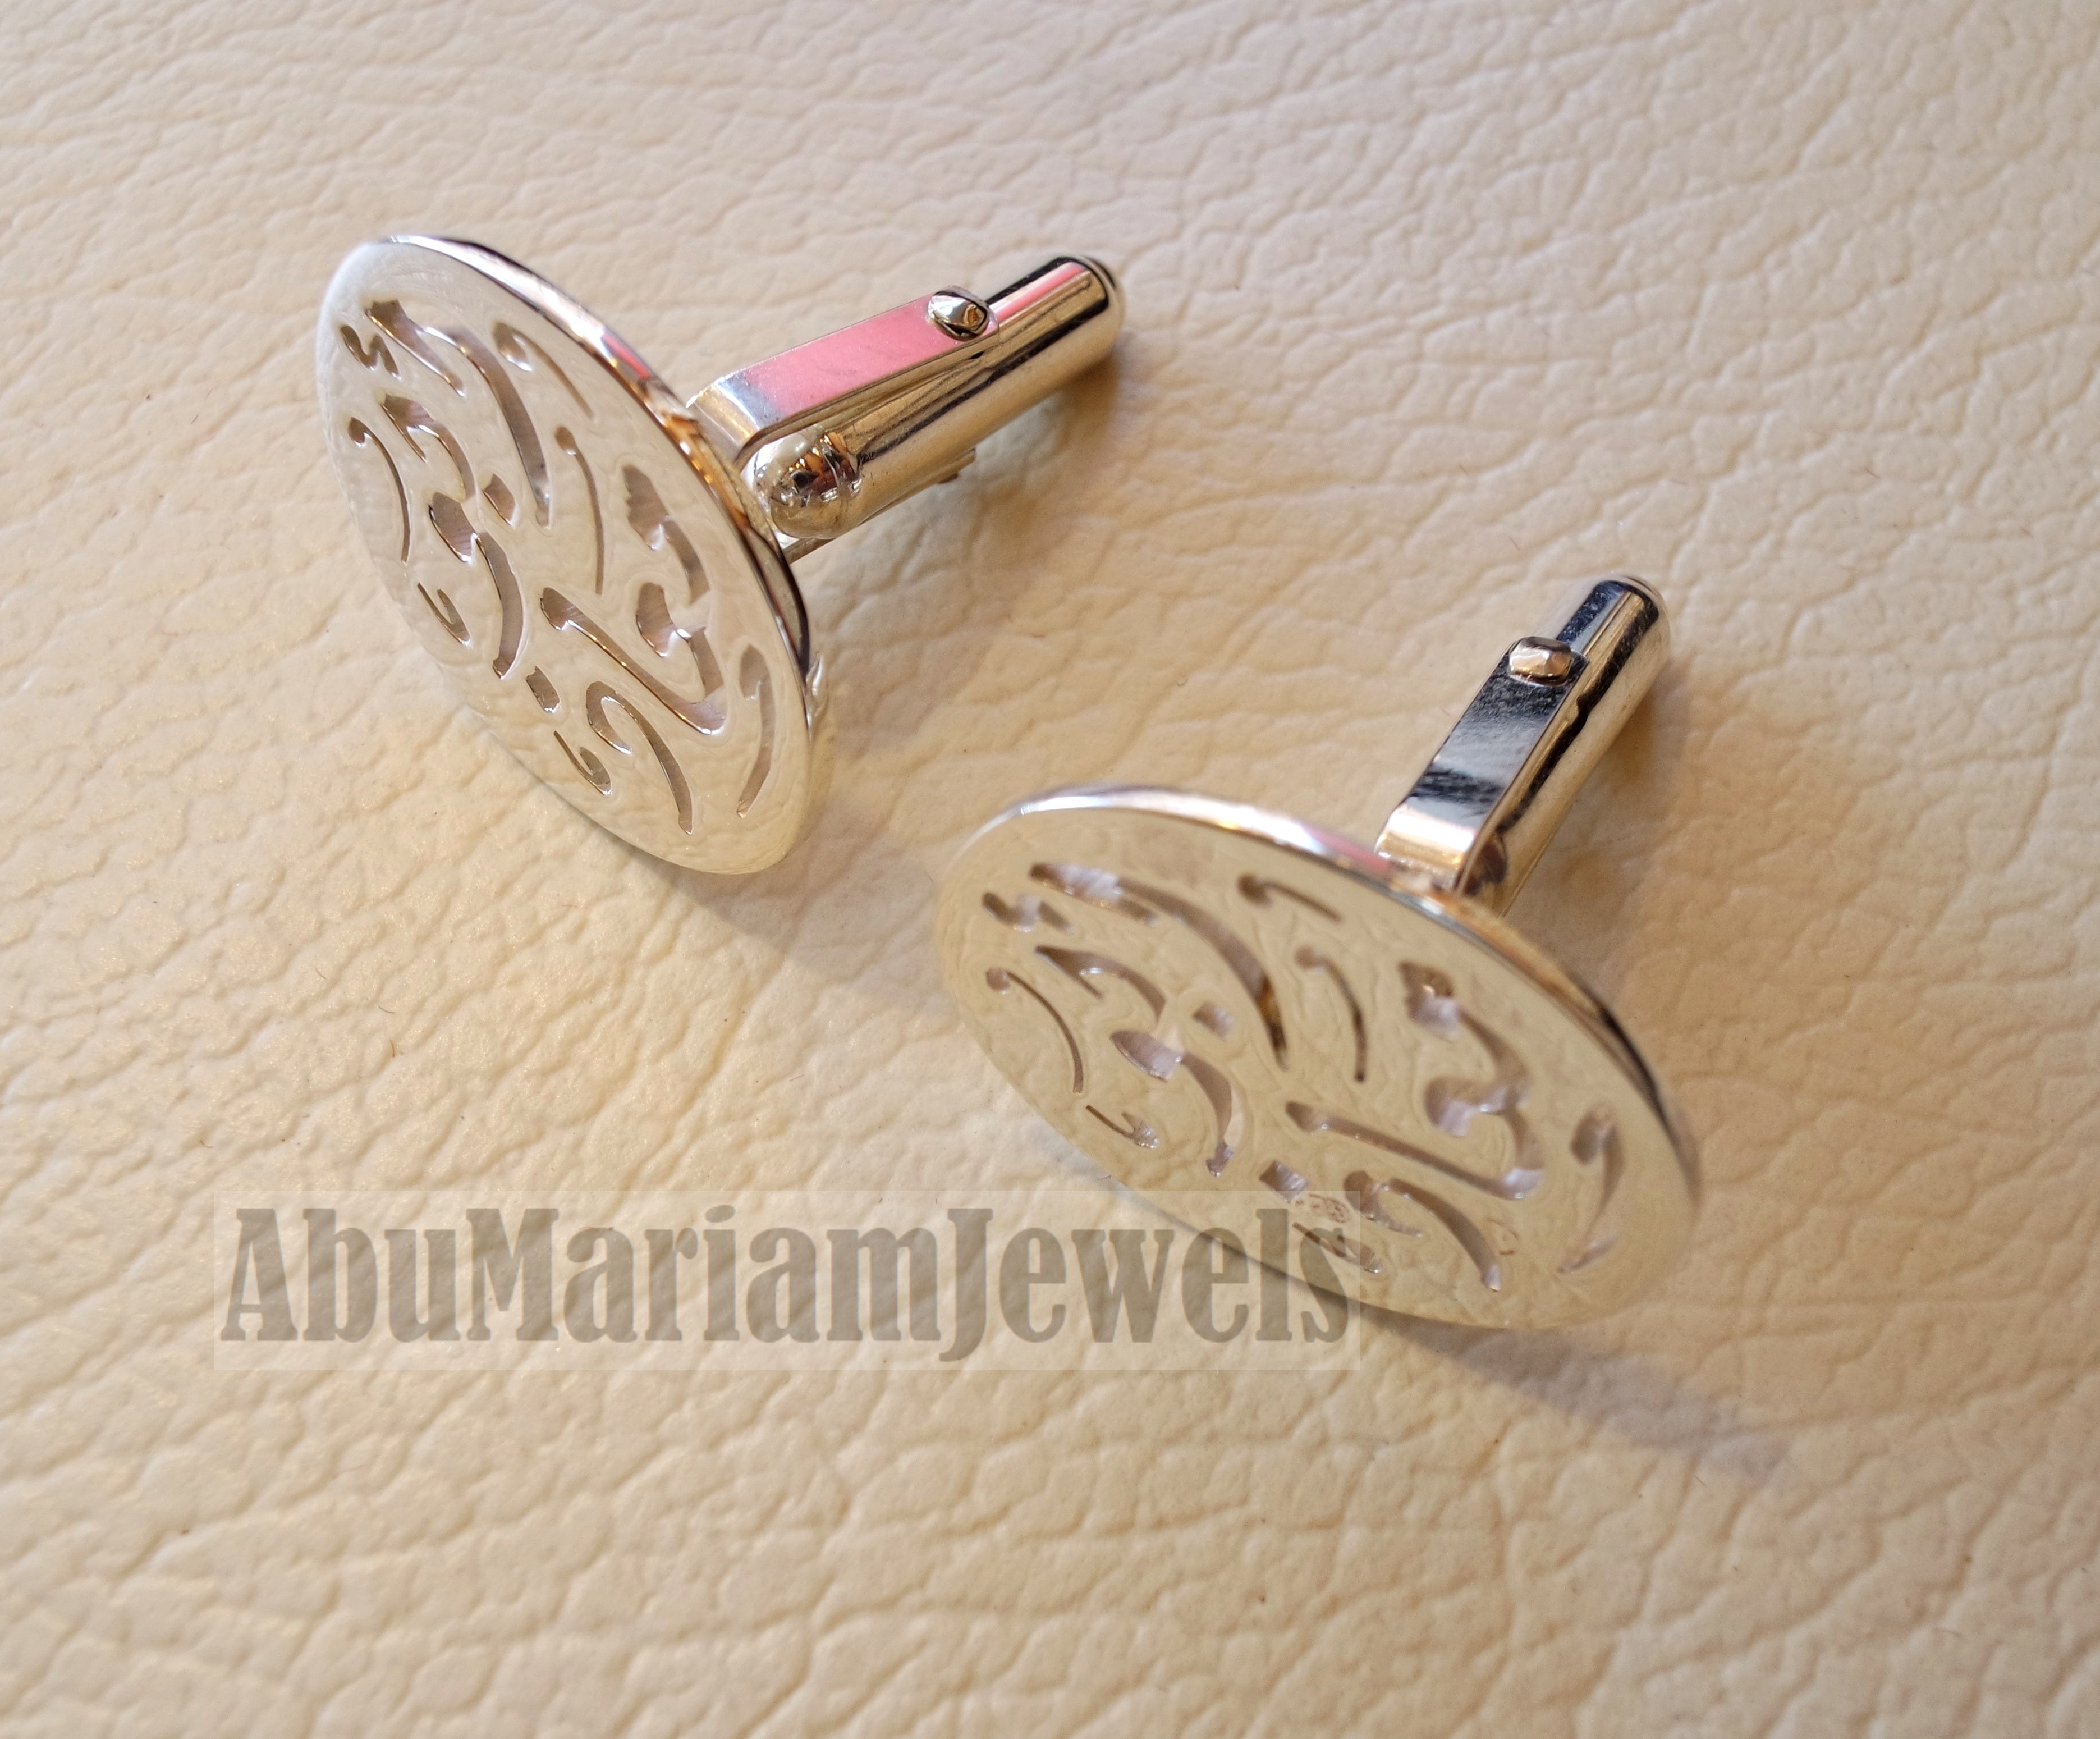 Oval cufflinks , cuflinks name of two words each calligraphy arabic customized any name made to order sterling silver 925 men jewelry cf009